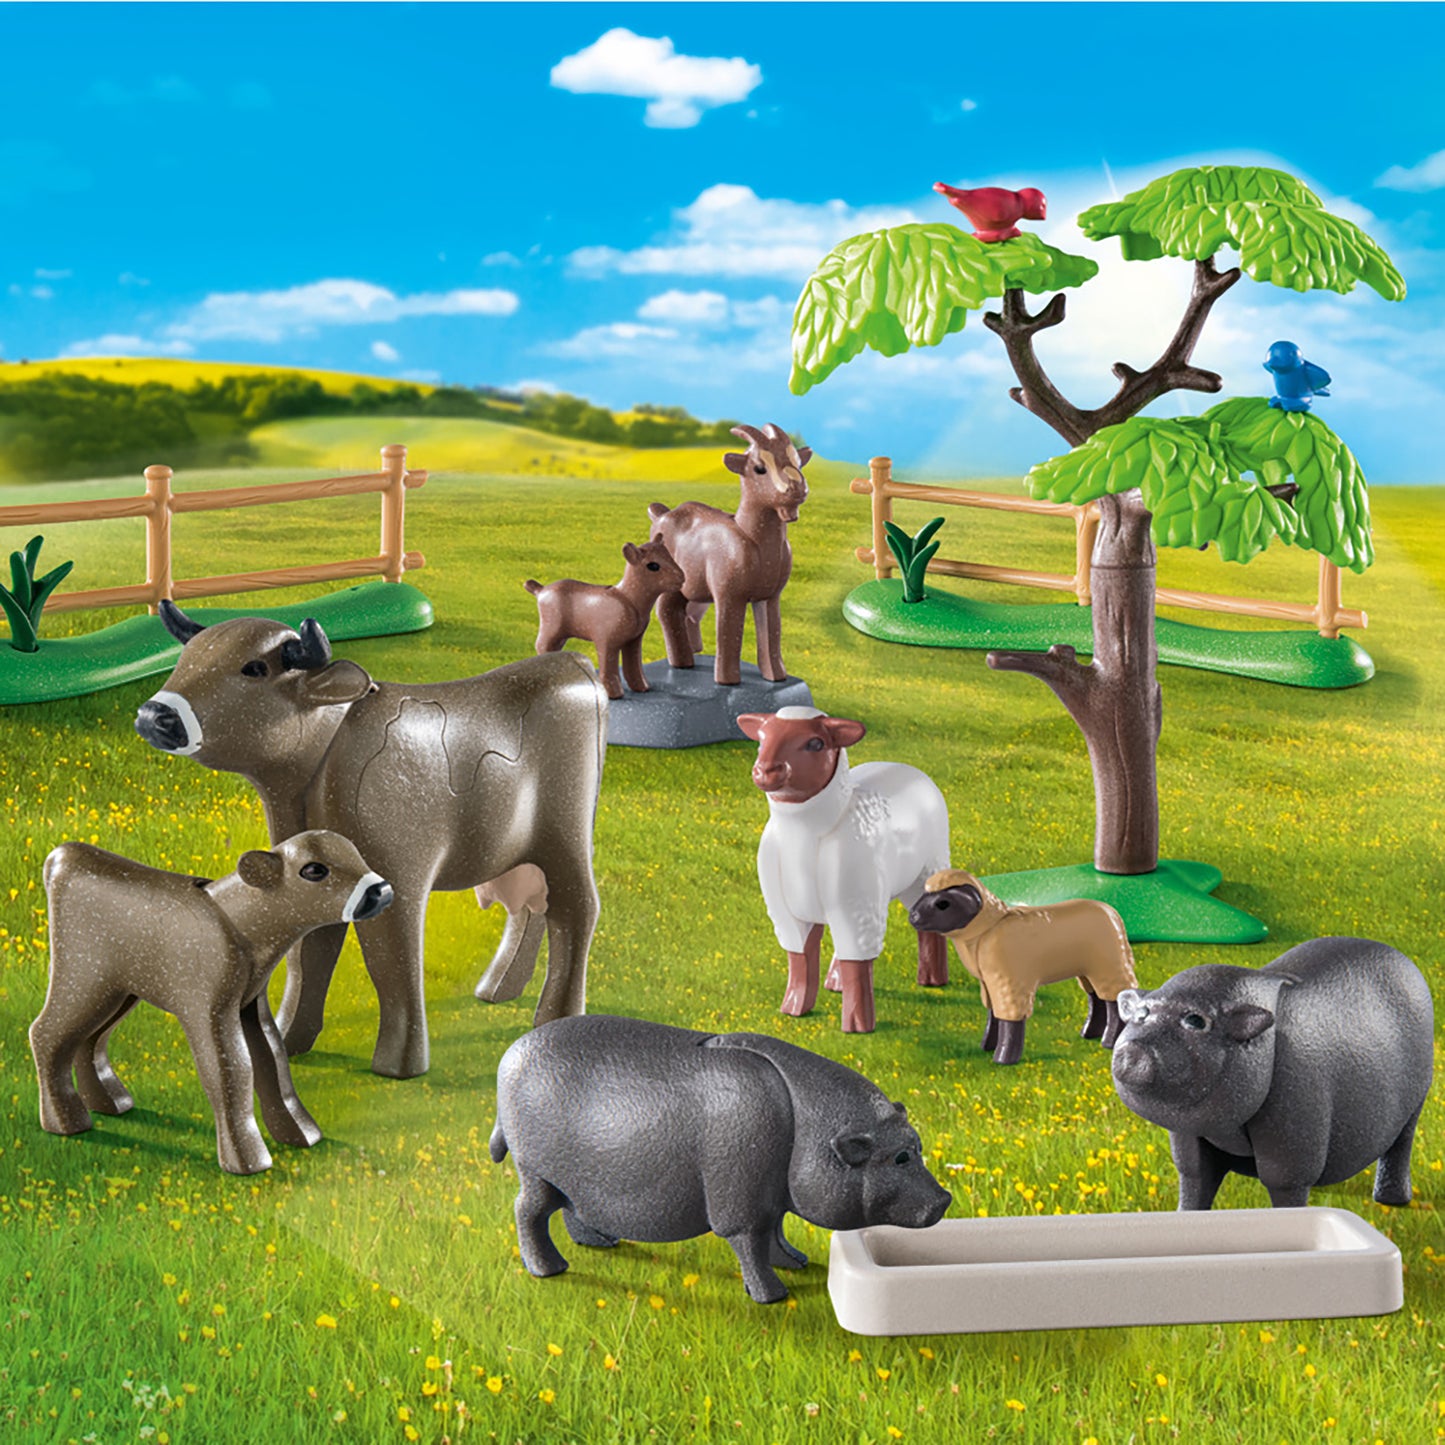 Animal Set with Paddock | Country | Eco-Plastic | Open-Ended Play For Kids